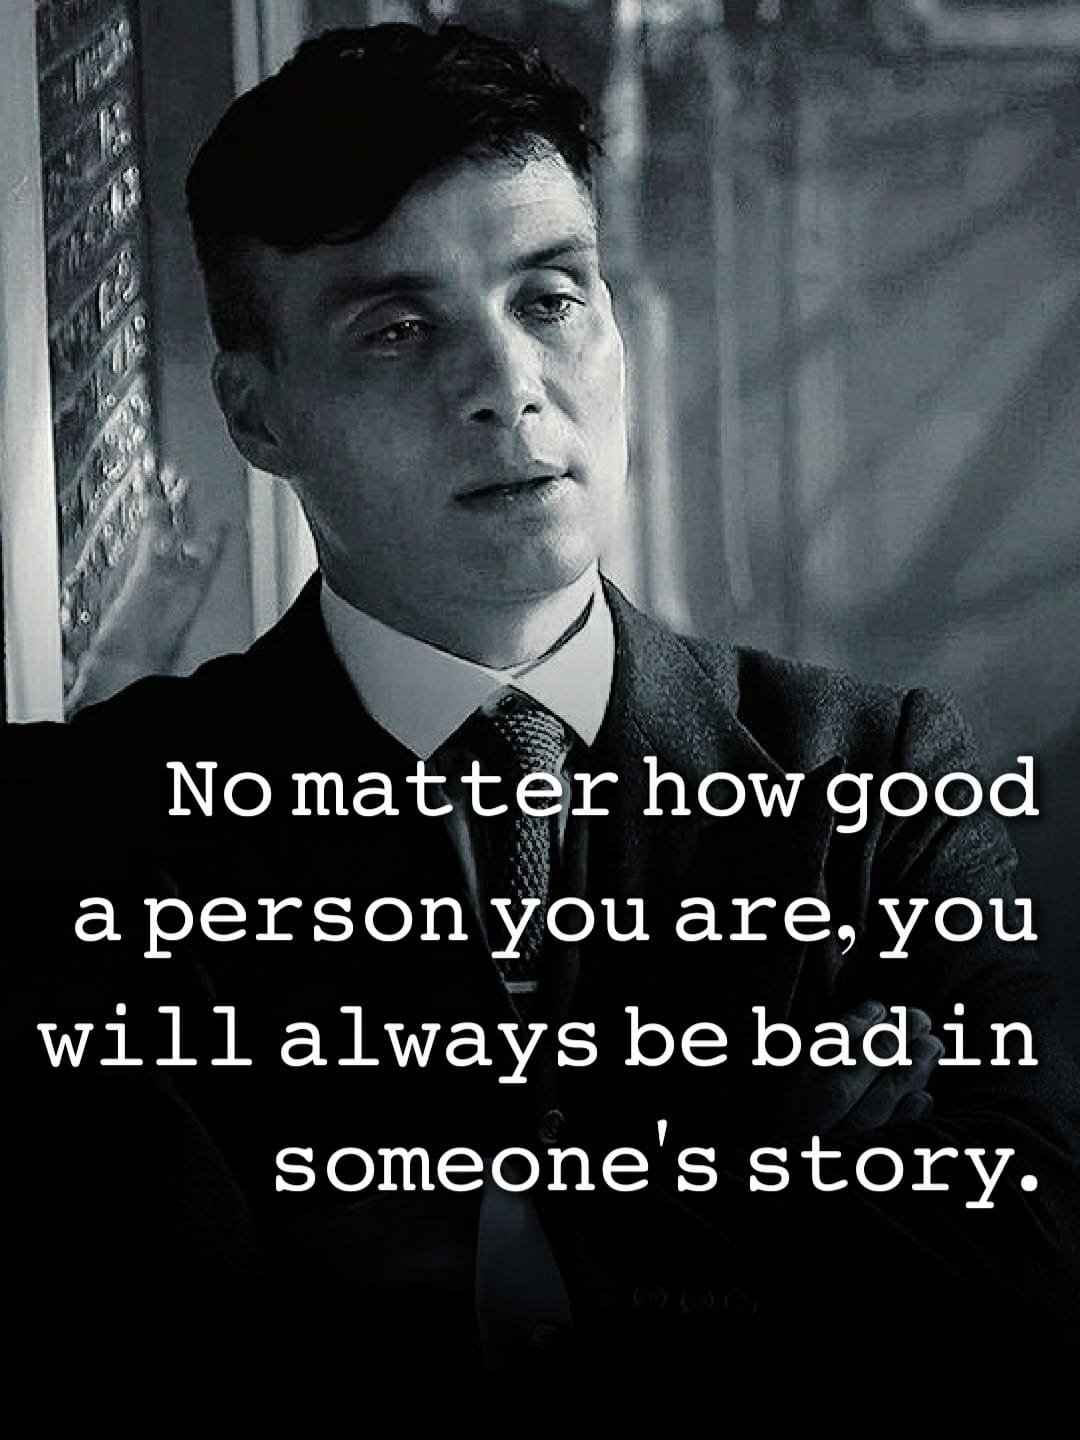 No matter how good a person you are, you are always bad in someone’s story..jpg